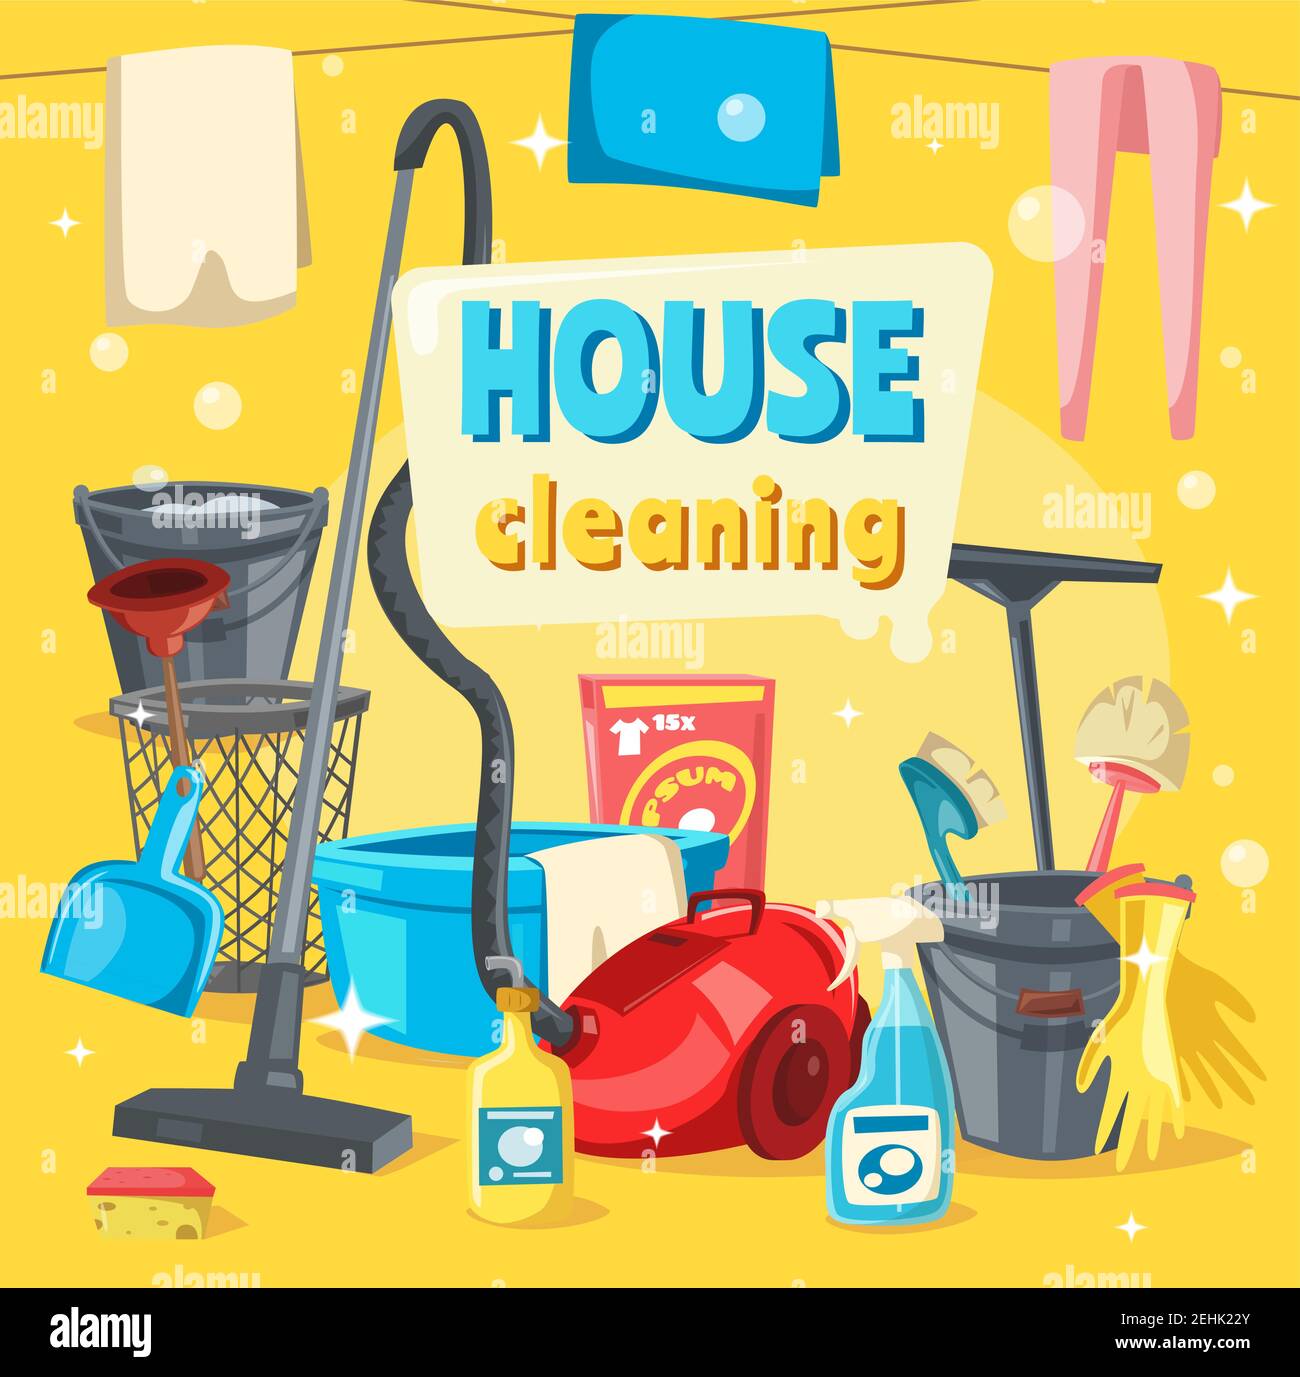 Raleigh Cleaning Services